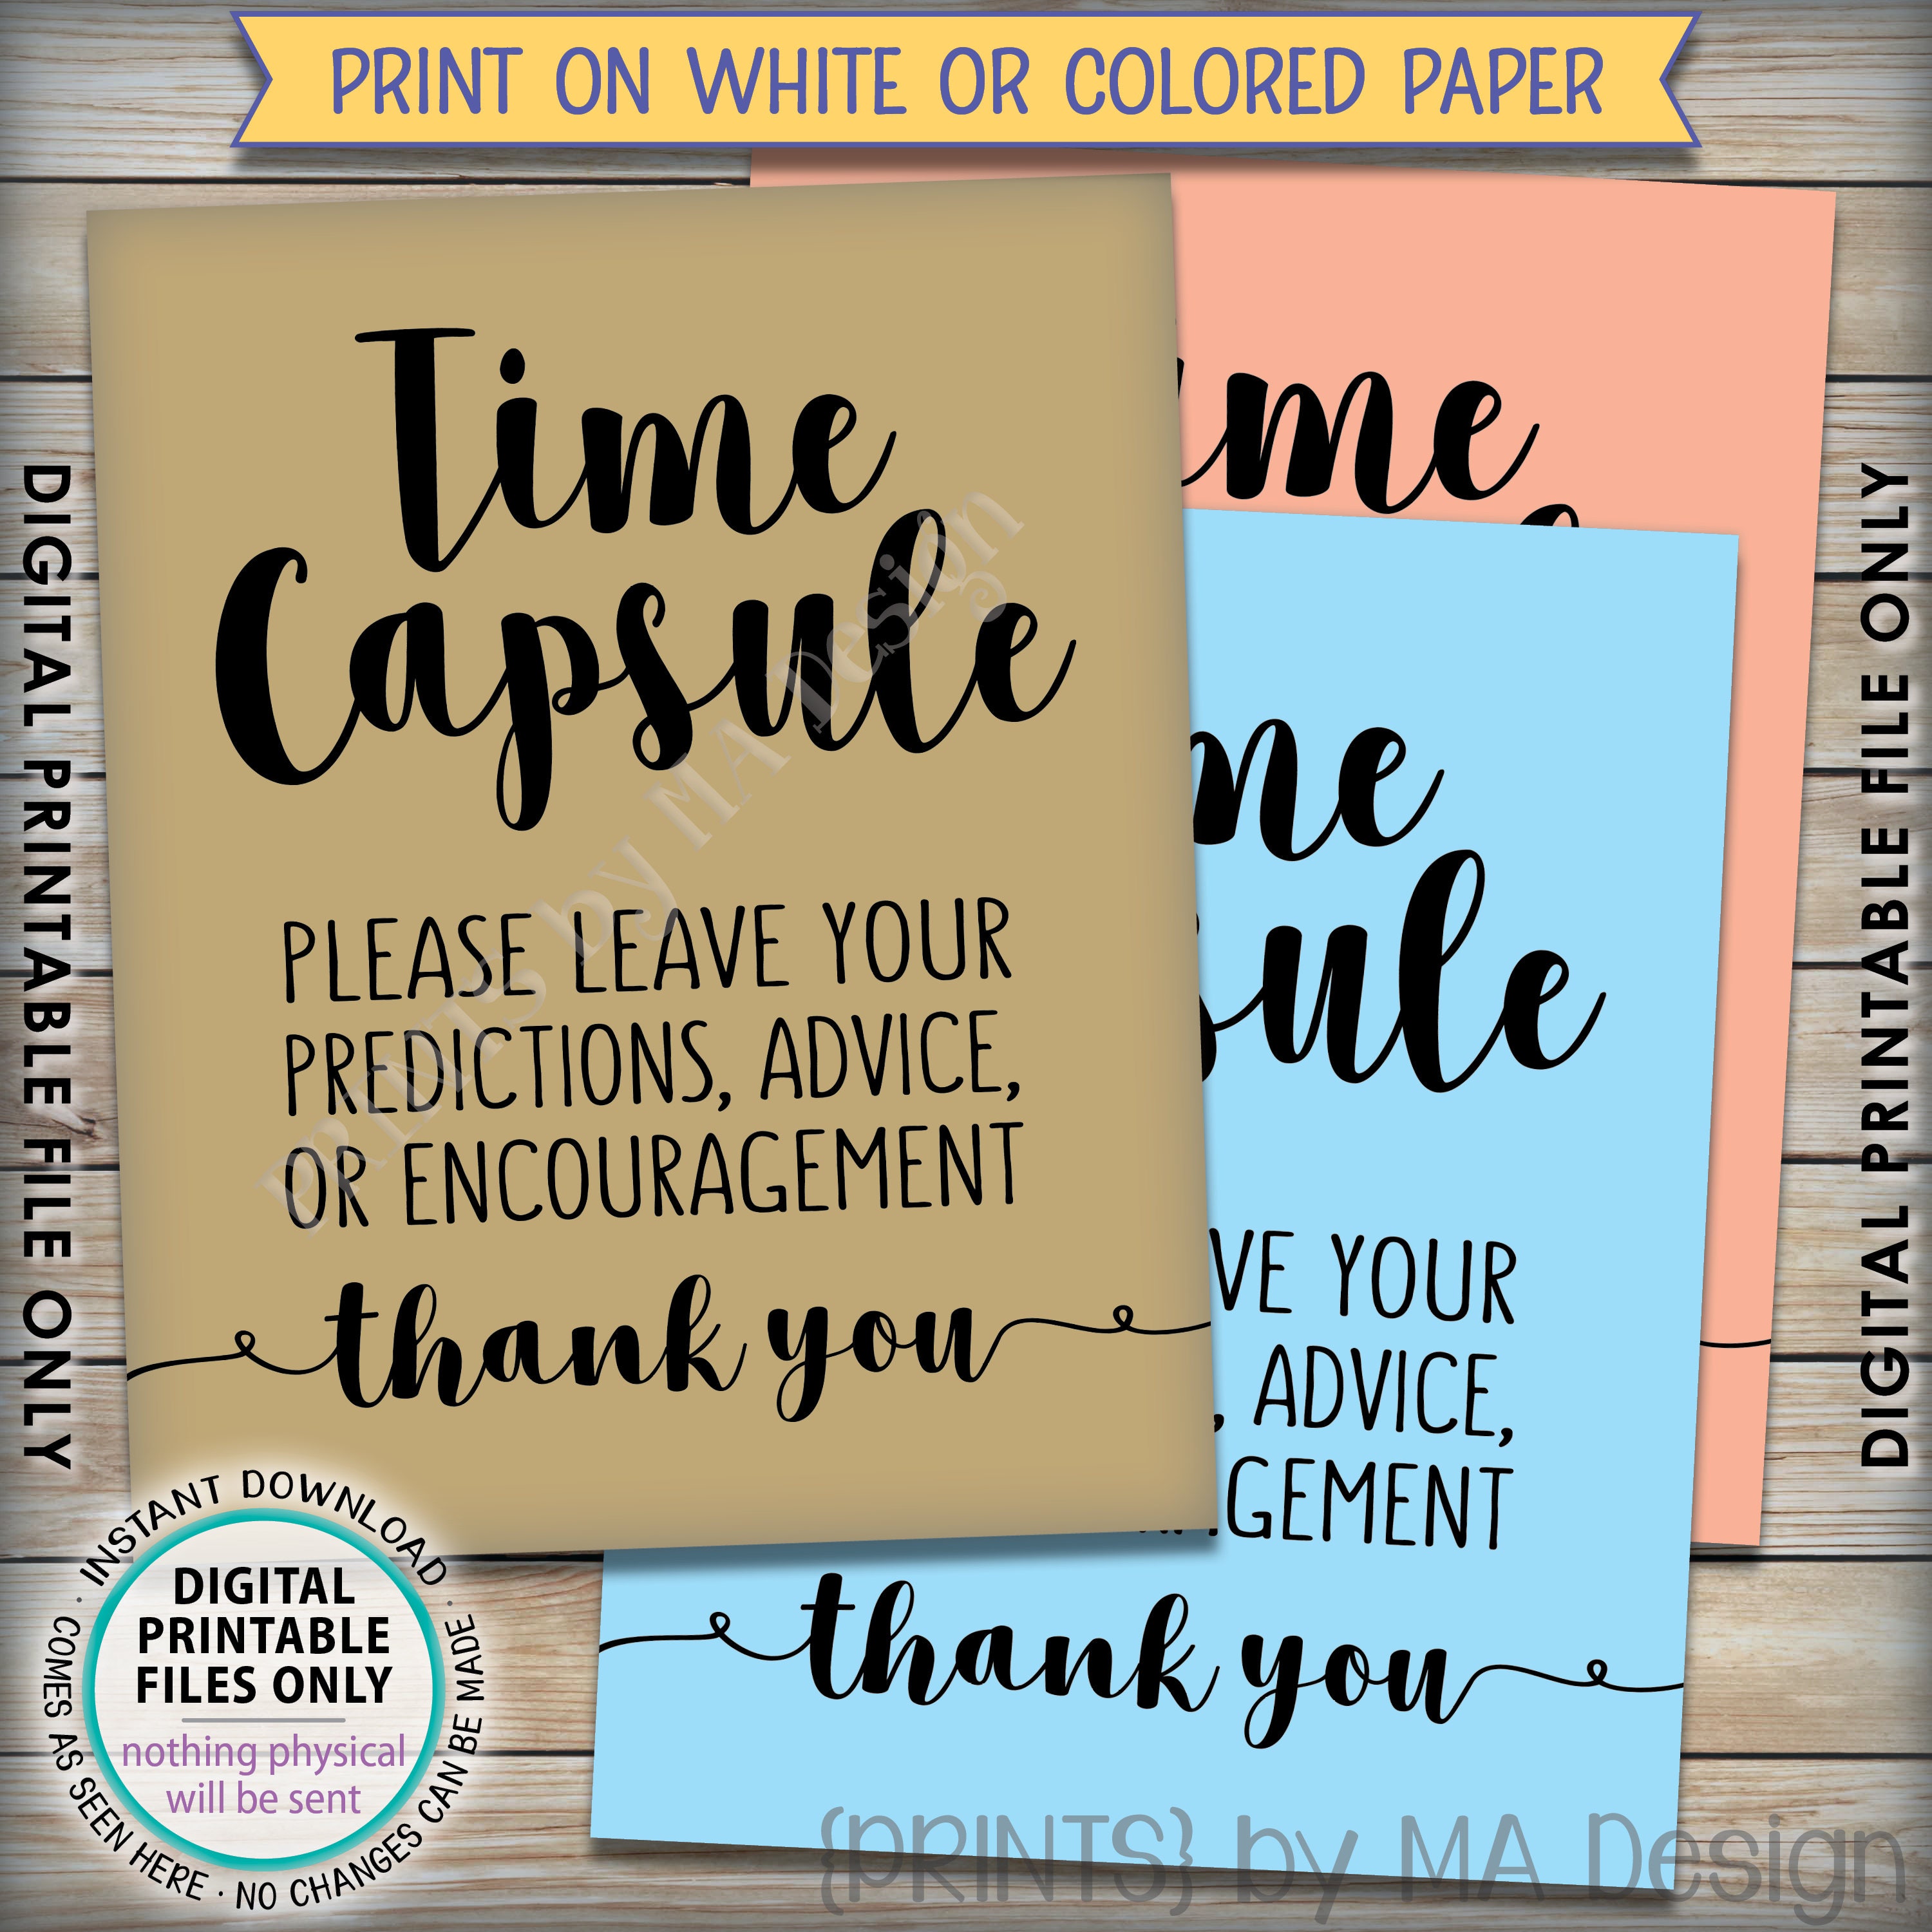 Capsule, Wedding Guest Book Predictions, Baby Shower Time Capsule Sign, Bridal Shower, 8x10” Printable Sign